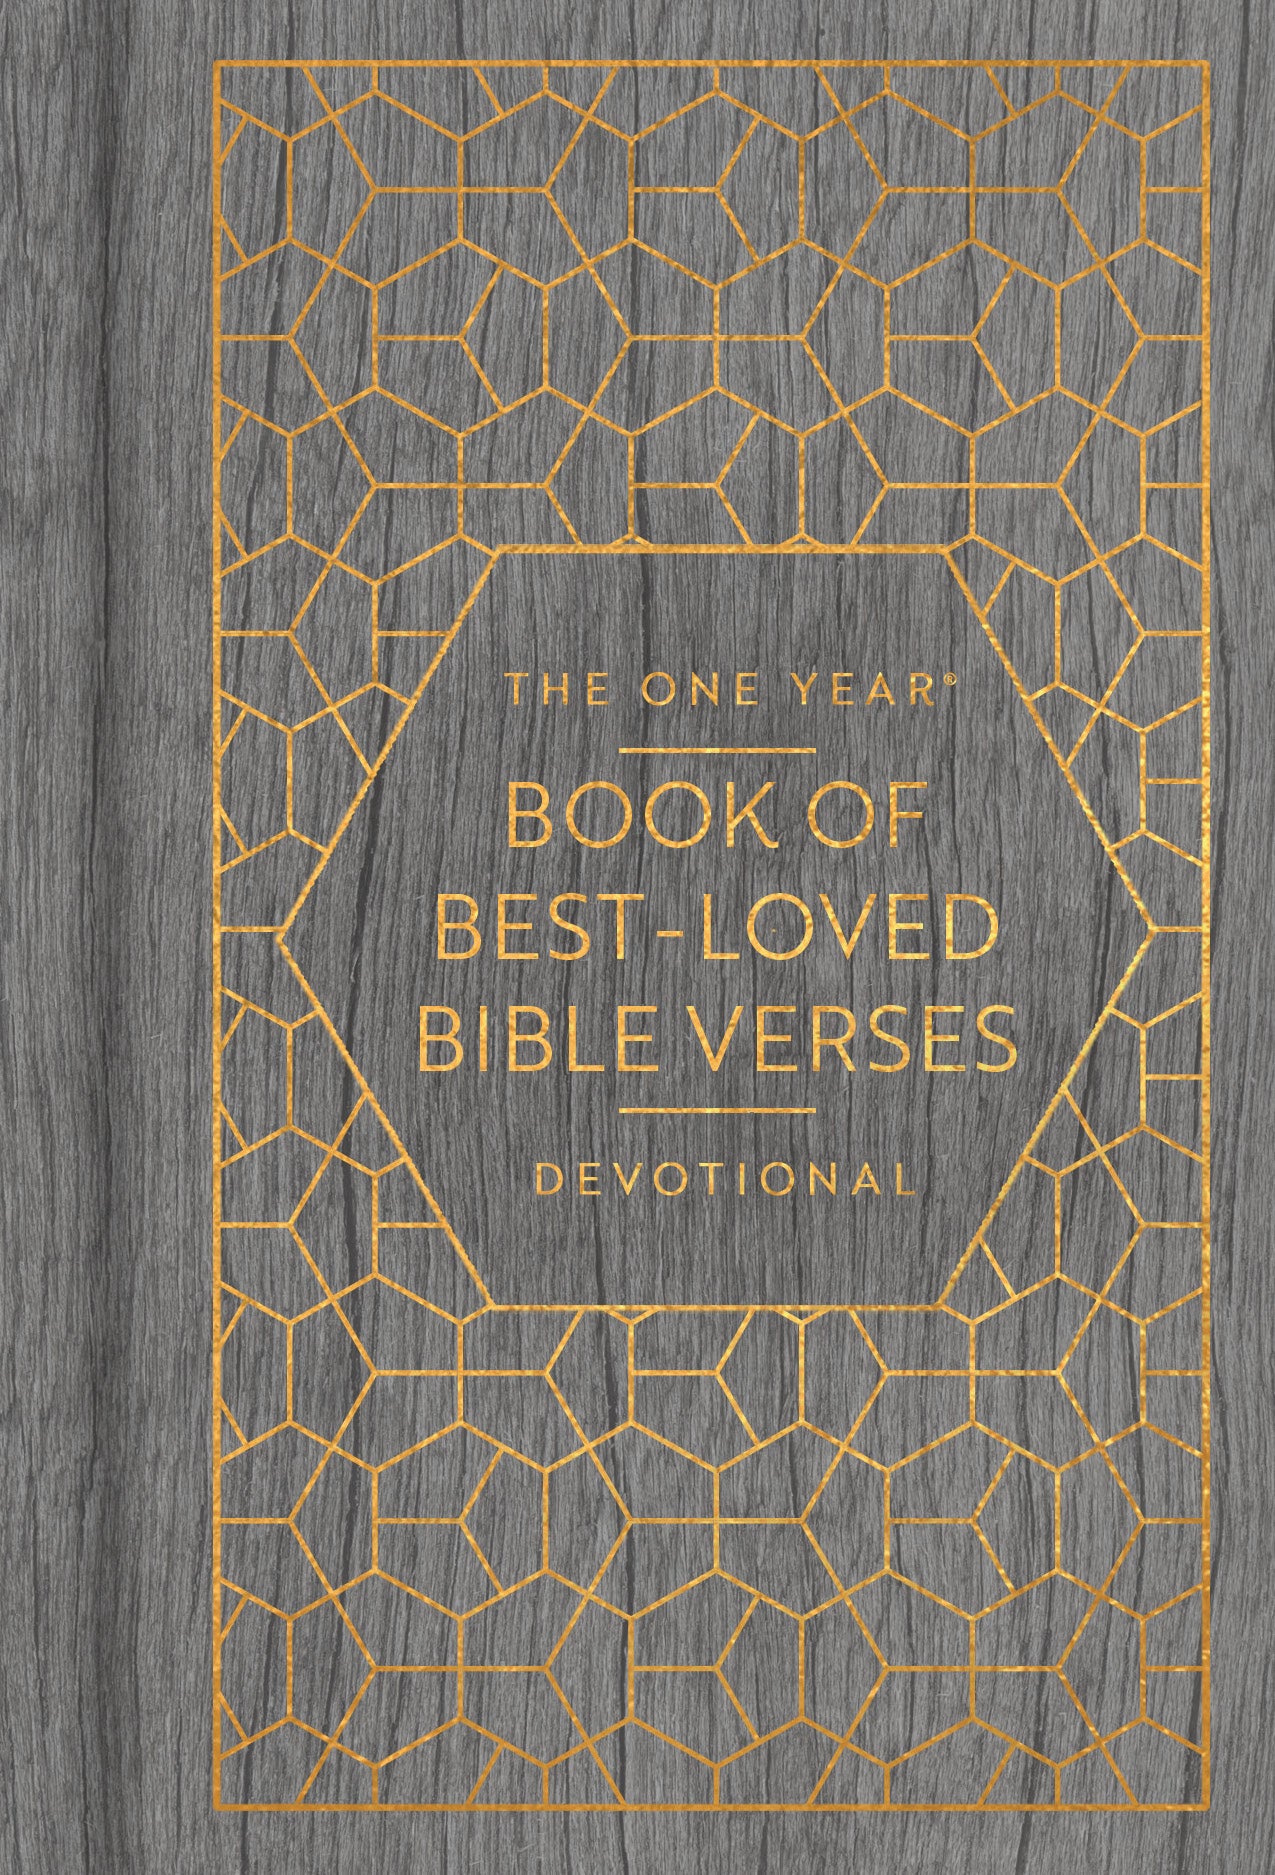 Image of The One Year Book of Best-Loved Bible Verses other